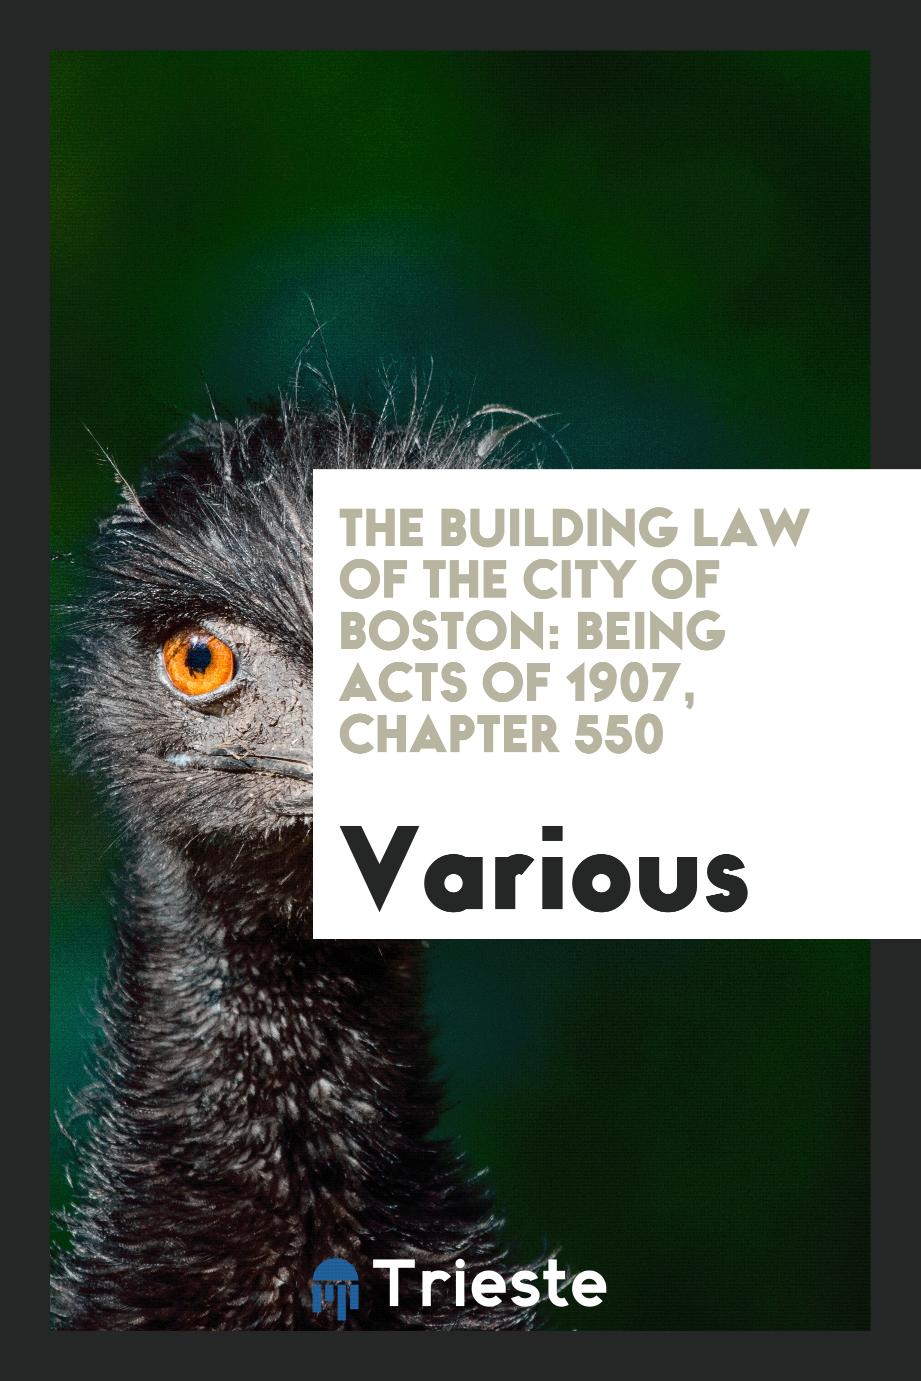 The Building Law of the City of Boston: Being Acts of 1907, Chapter 550